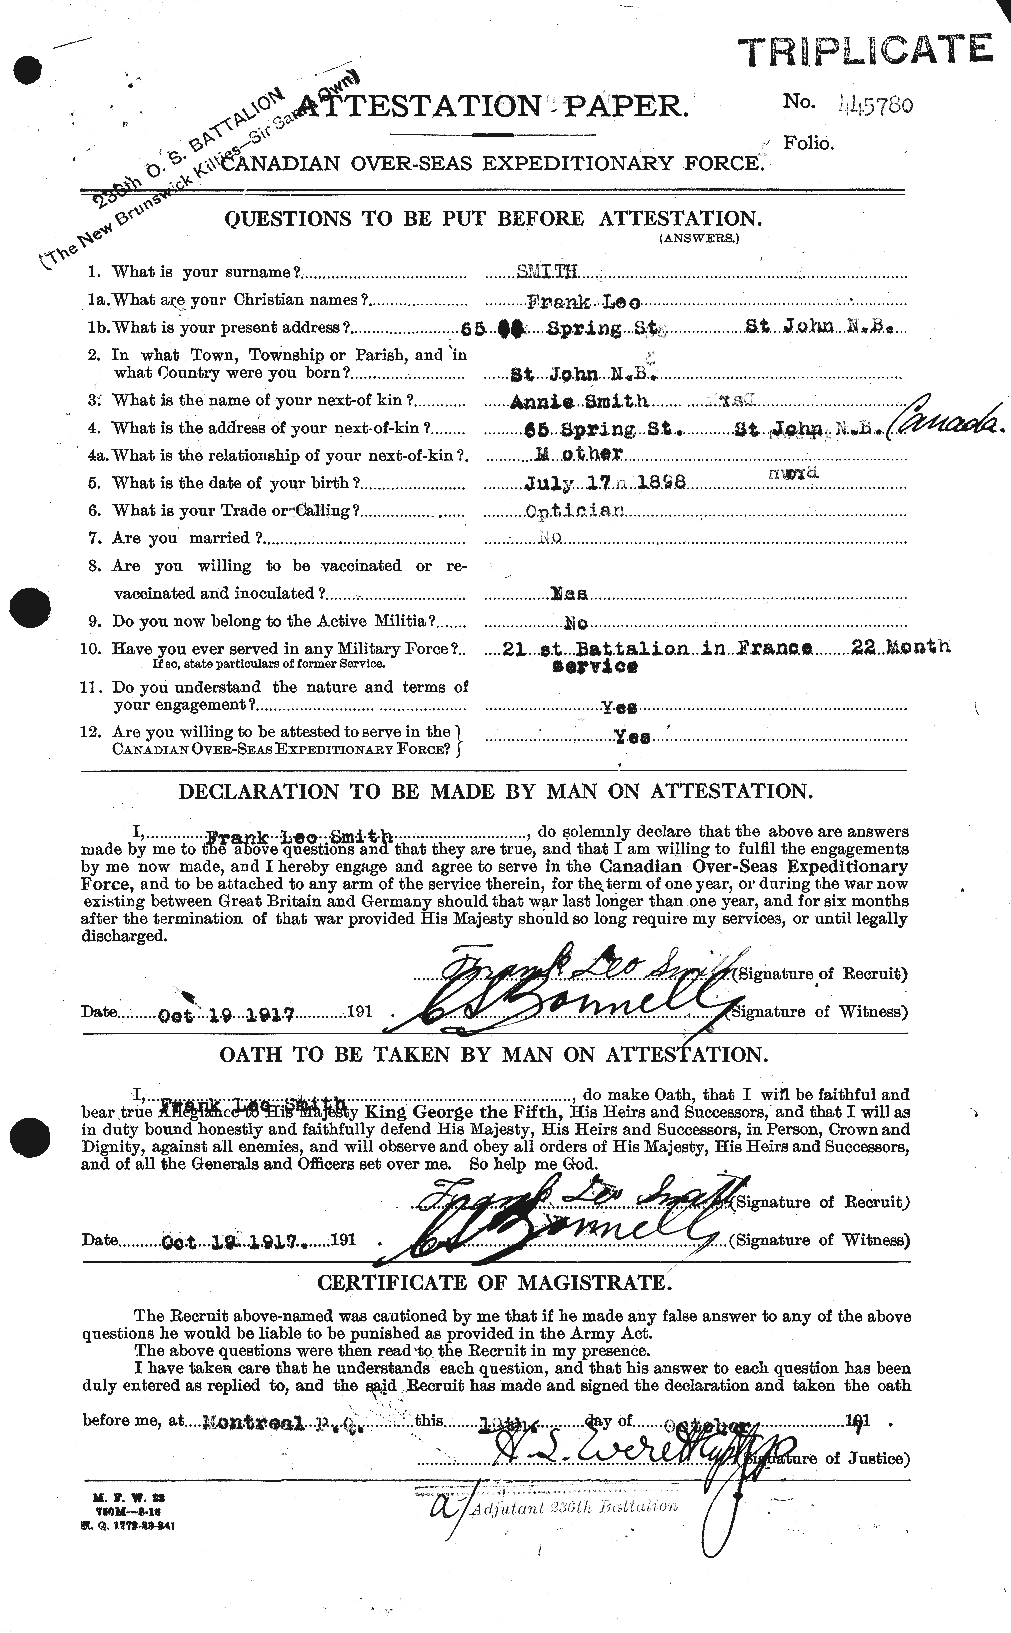 Personnel Records of the First World War - CEF 106587a